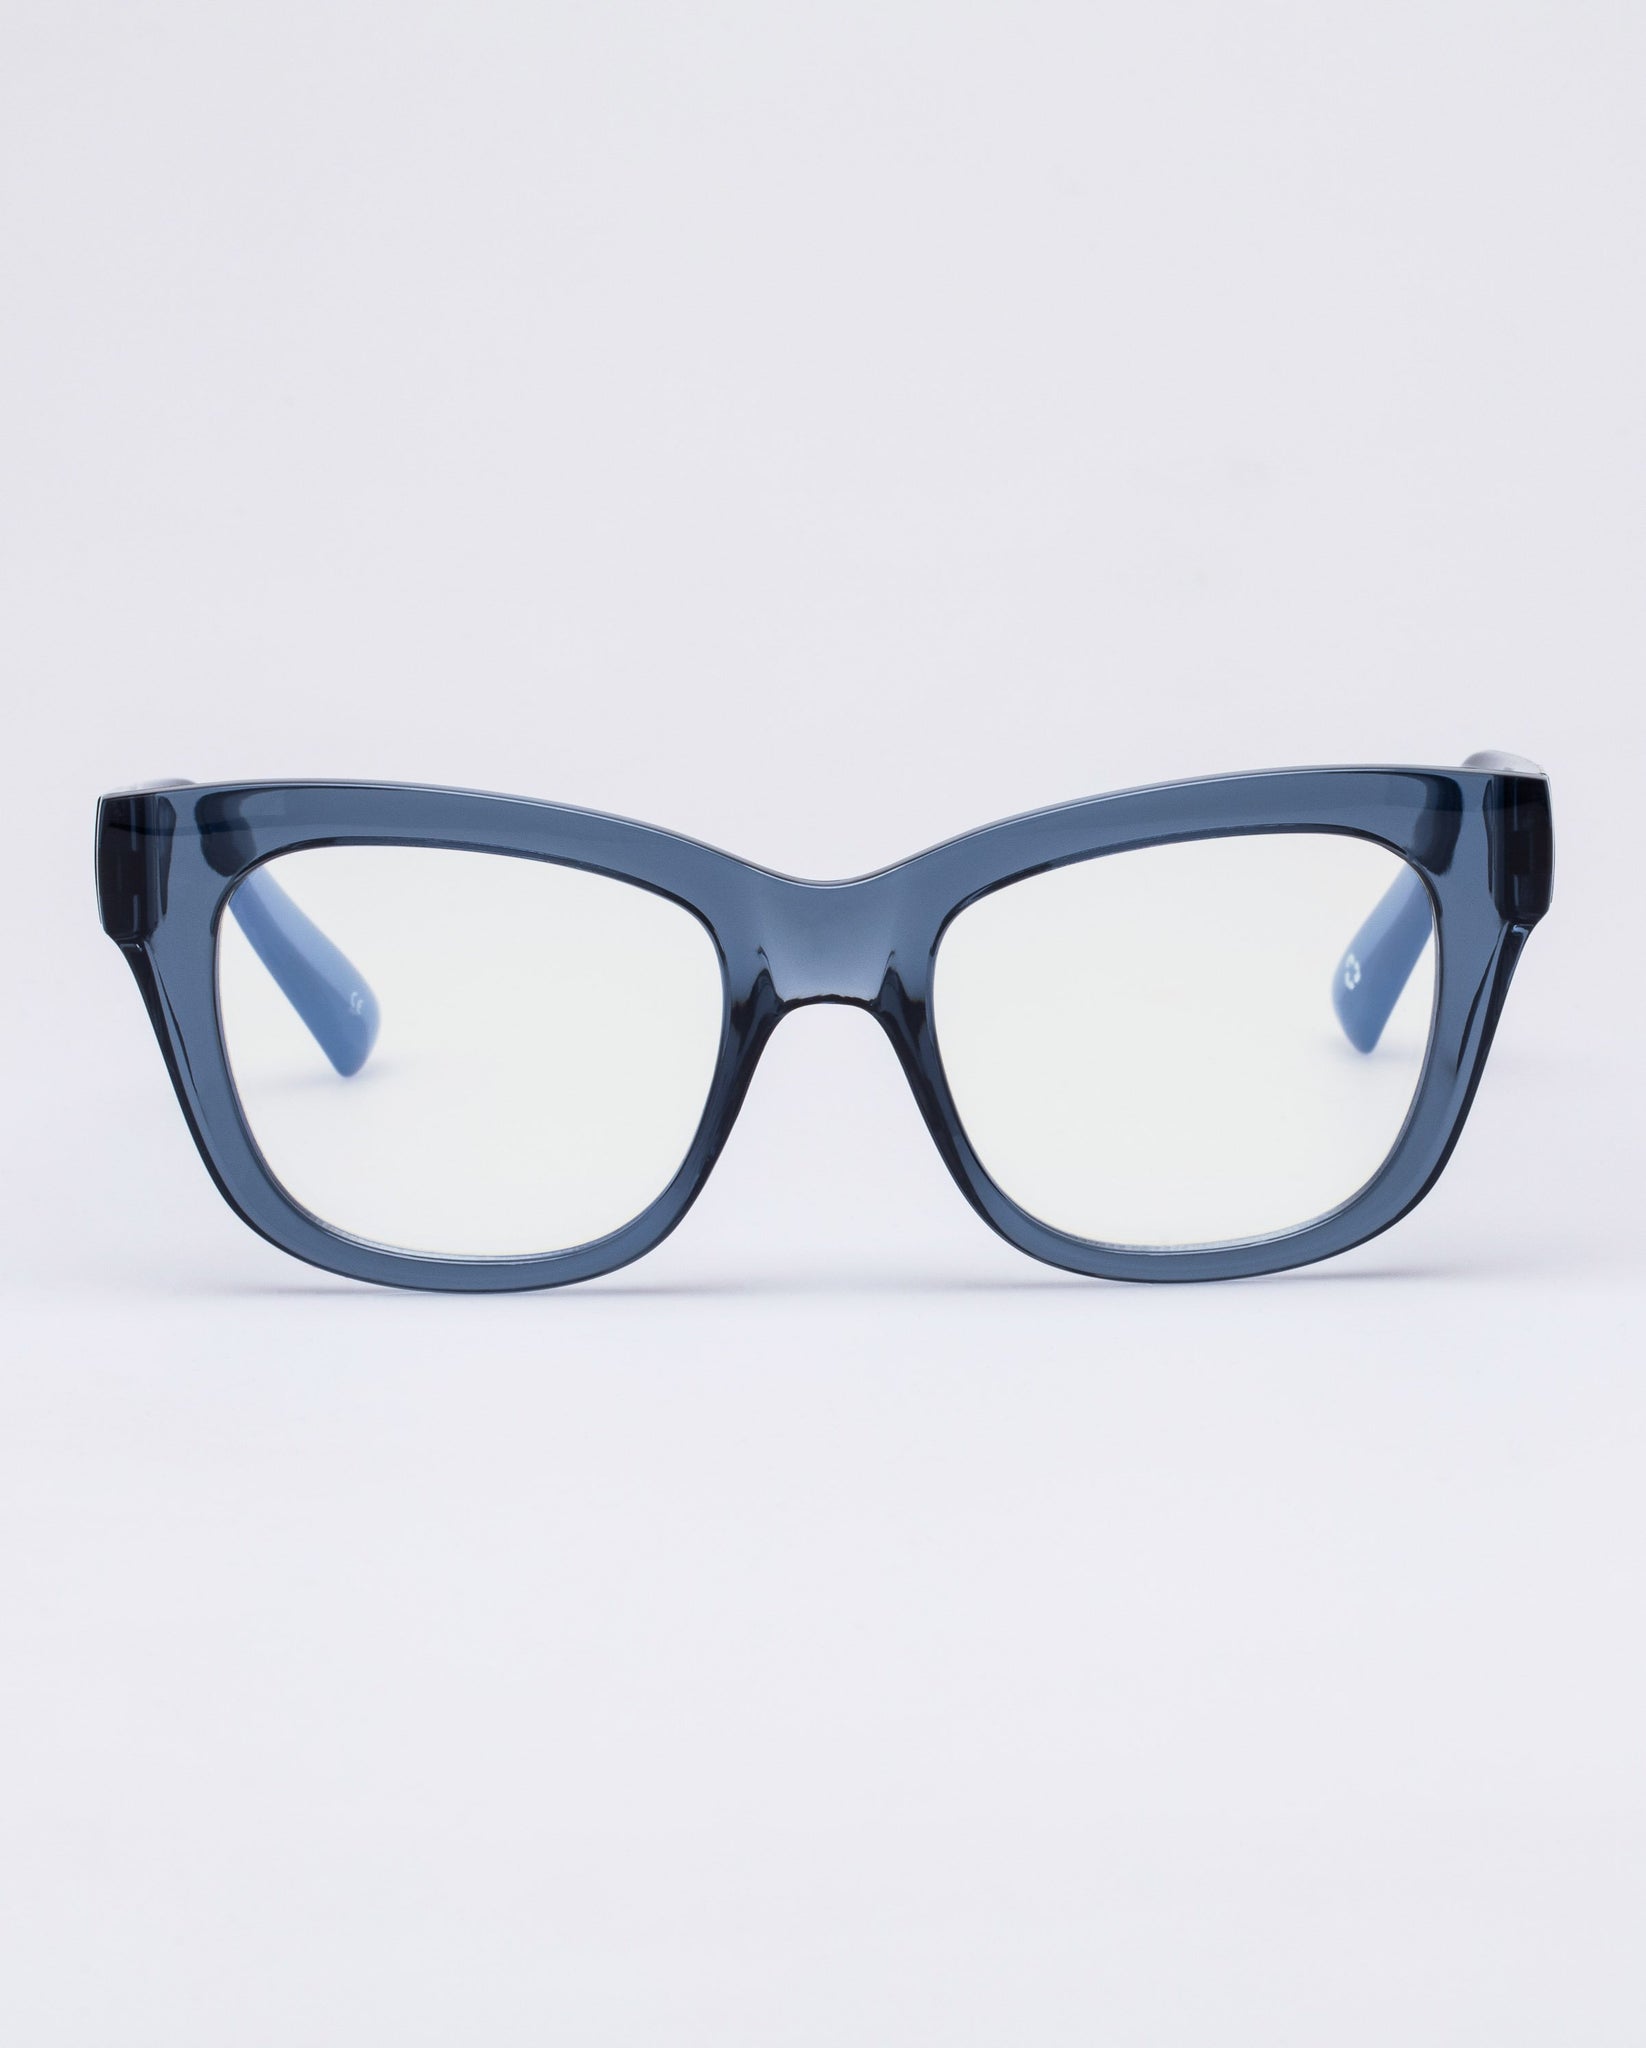 The Book Club 'The Hate Relax Me' Blue Light Reading Glasses - Crystal Spruce | PRESENCE Paris